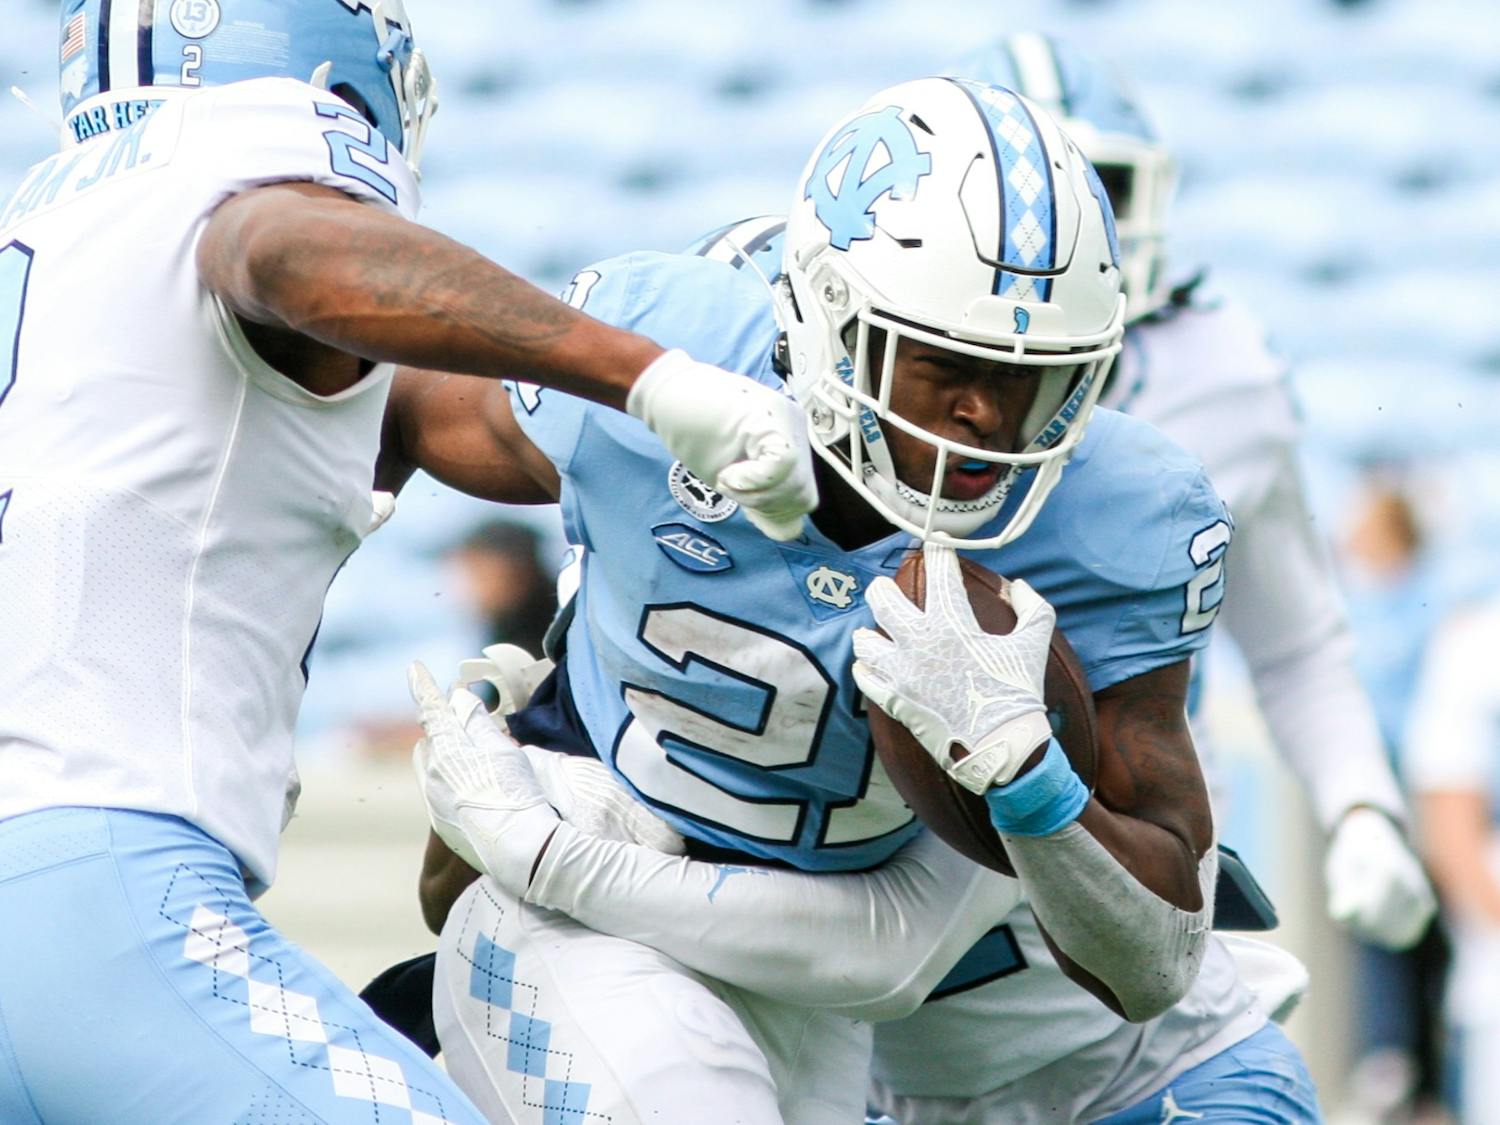 Sophomore running back Elijah Green (21) powers through the defensive line in the Spring Game on Saturday, April 9, 2022. The Tar Heels and Carolina tied, 14-14.